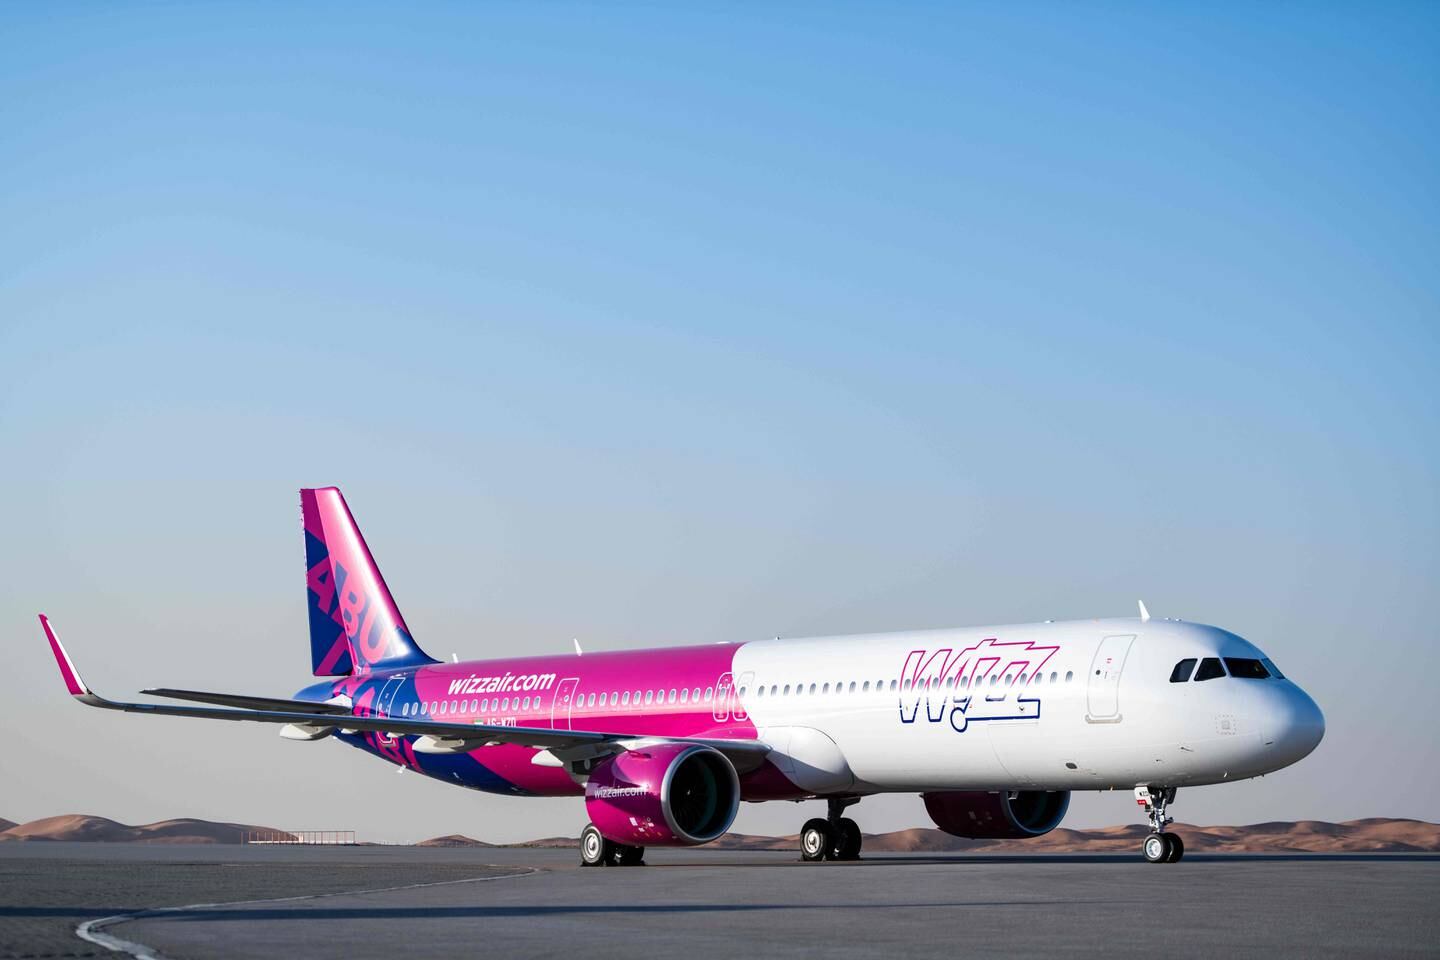 The low-cost airline is also launching daily flights to Kuwait. Photo: Wizz Air Abu Dhabi